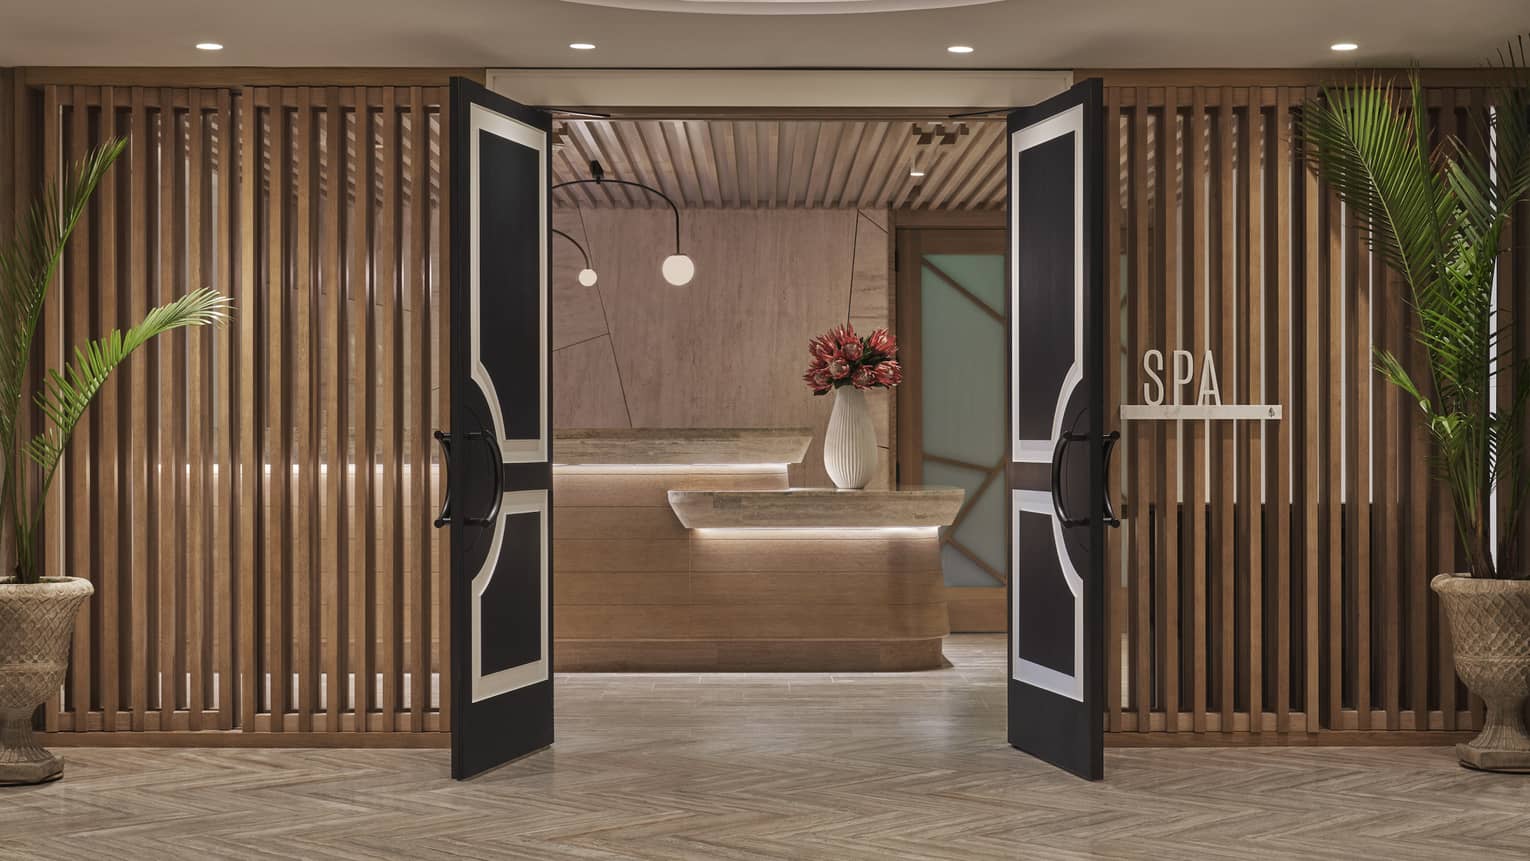 The entrance to a spa at a hotel, dark wood doors with wooden beams acting as walls.